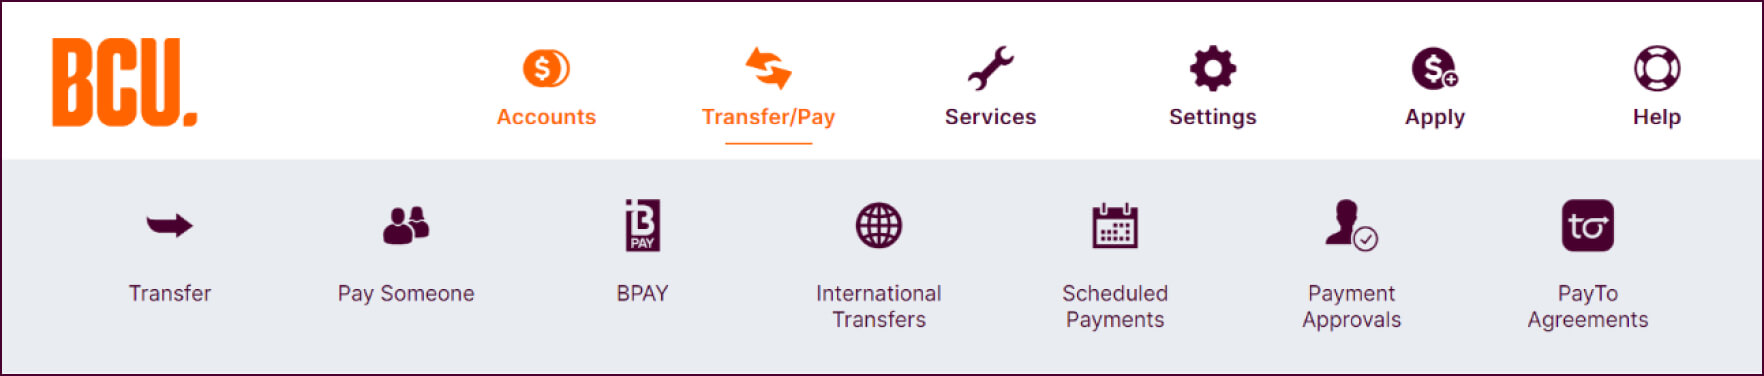 Screenshot of BCU iBank, showing that PayTo Agreements can be found under the Transfer/Pay menu item in BCU iBank